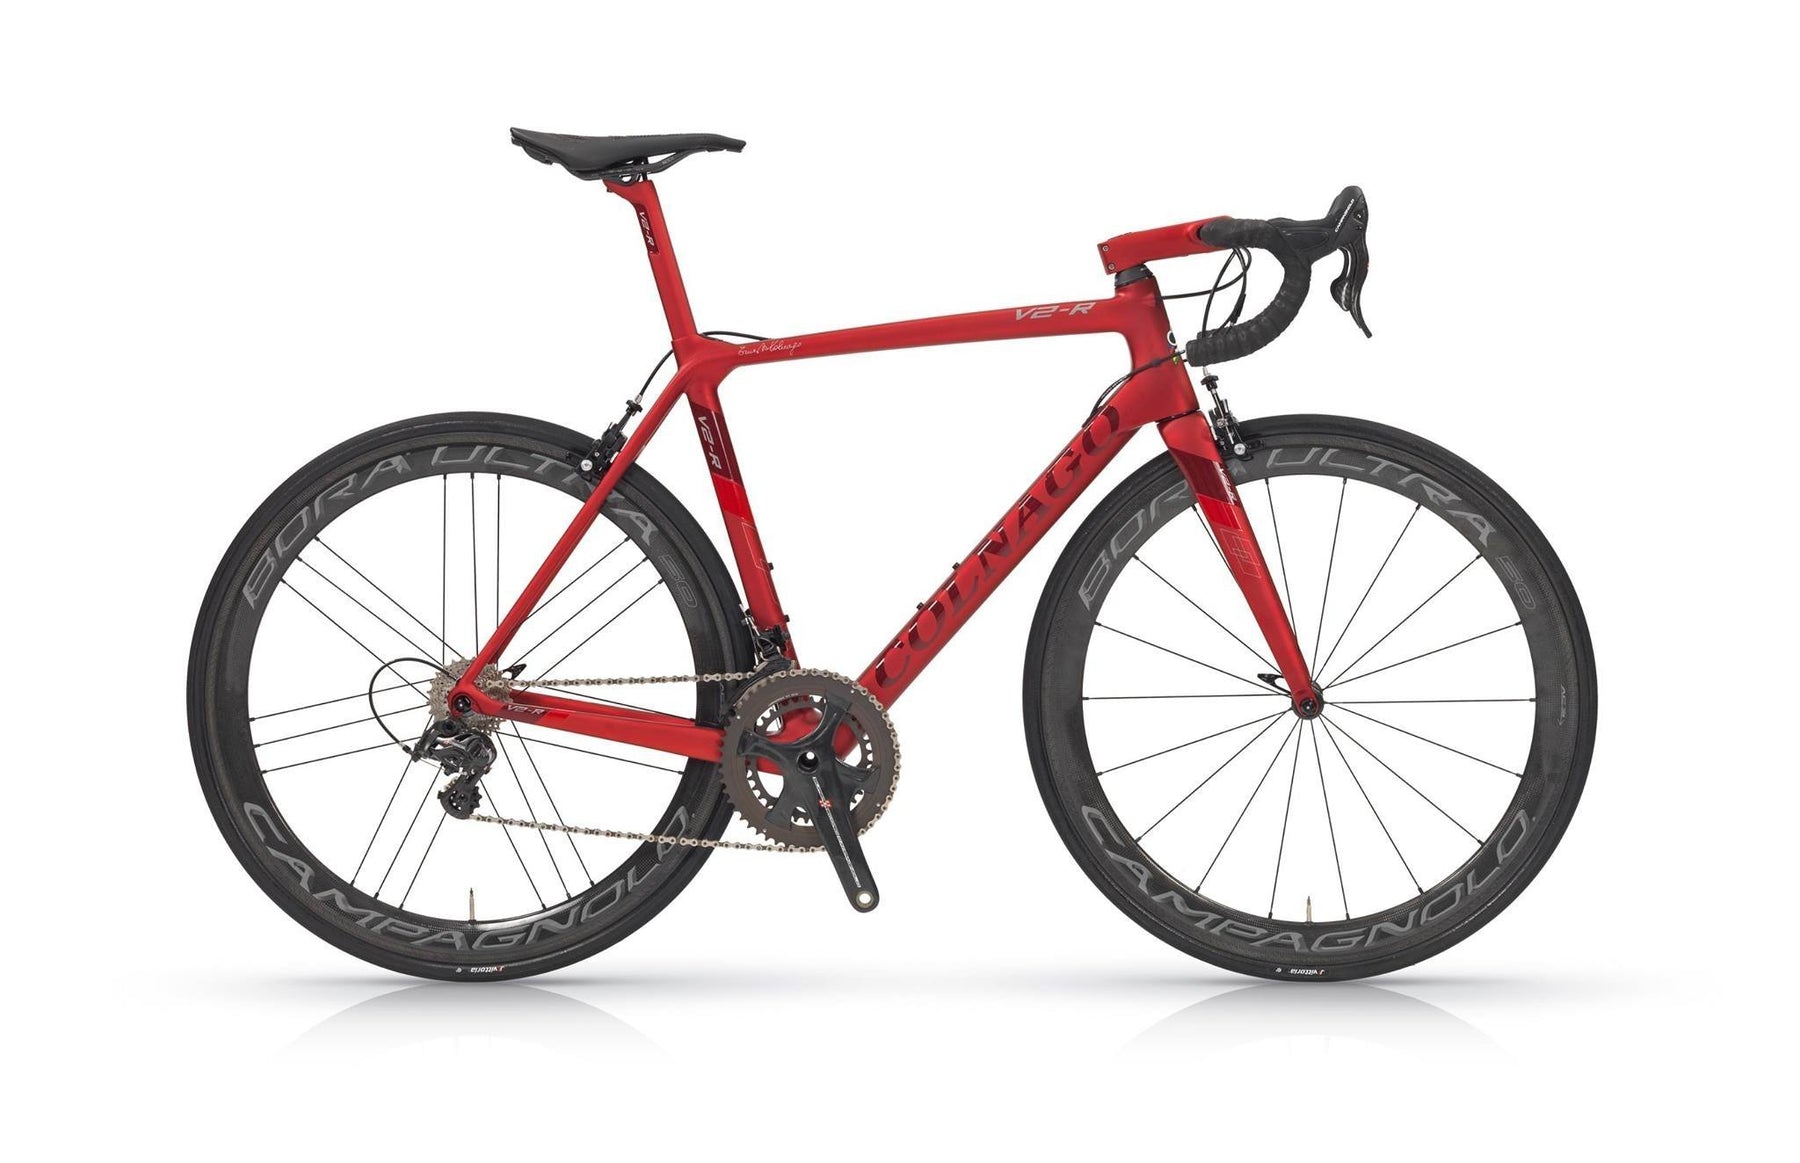 Colnago just launched the New V2-R to replace the V1-R.